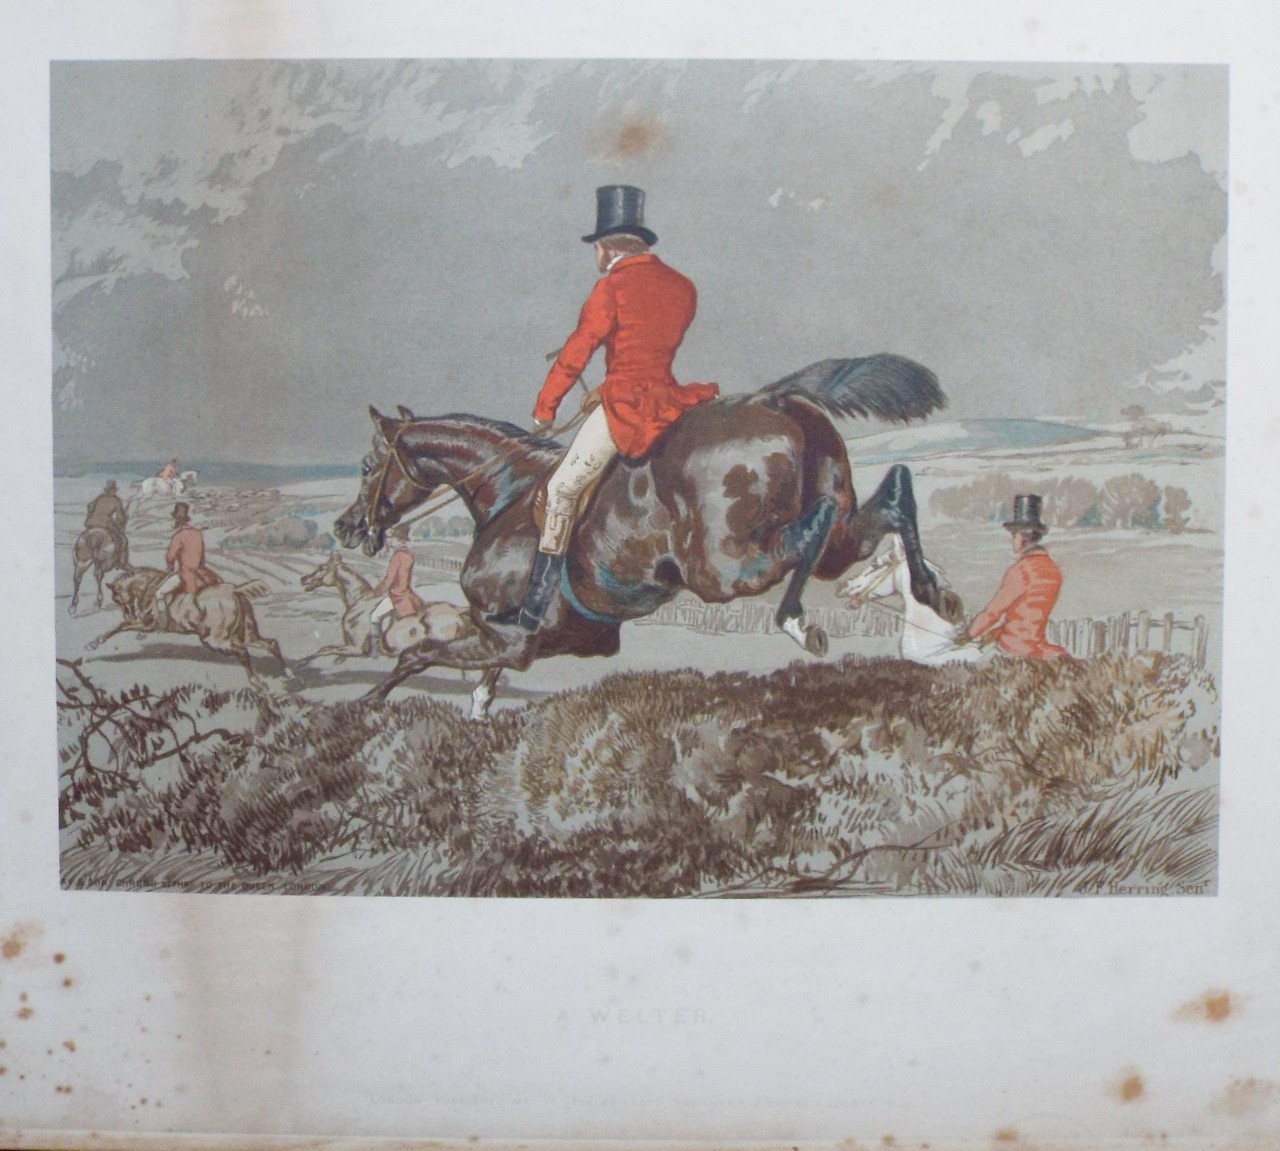 Chromo-lithograph - Herring's Sporting Sketches. A Welter.